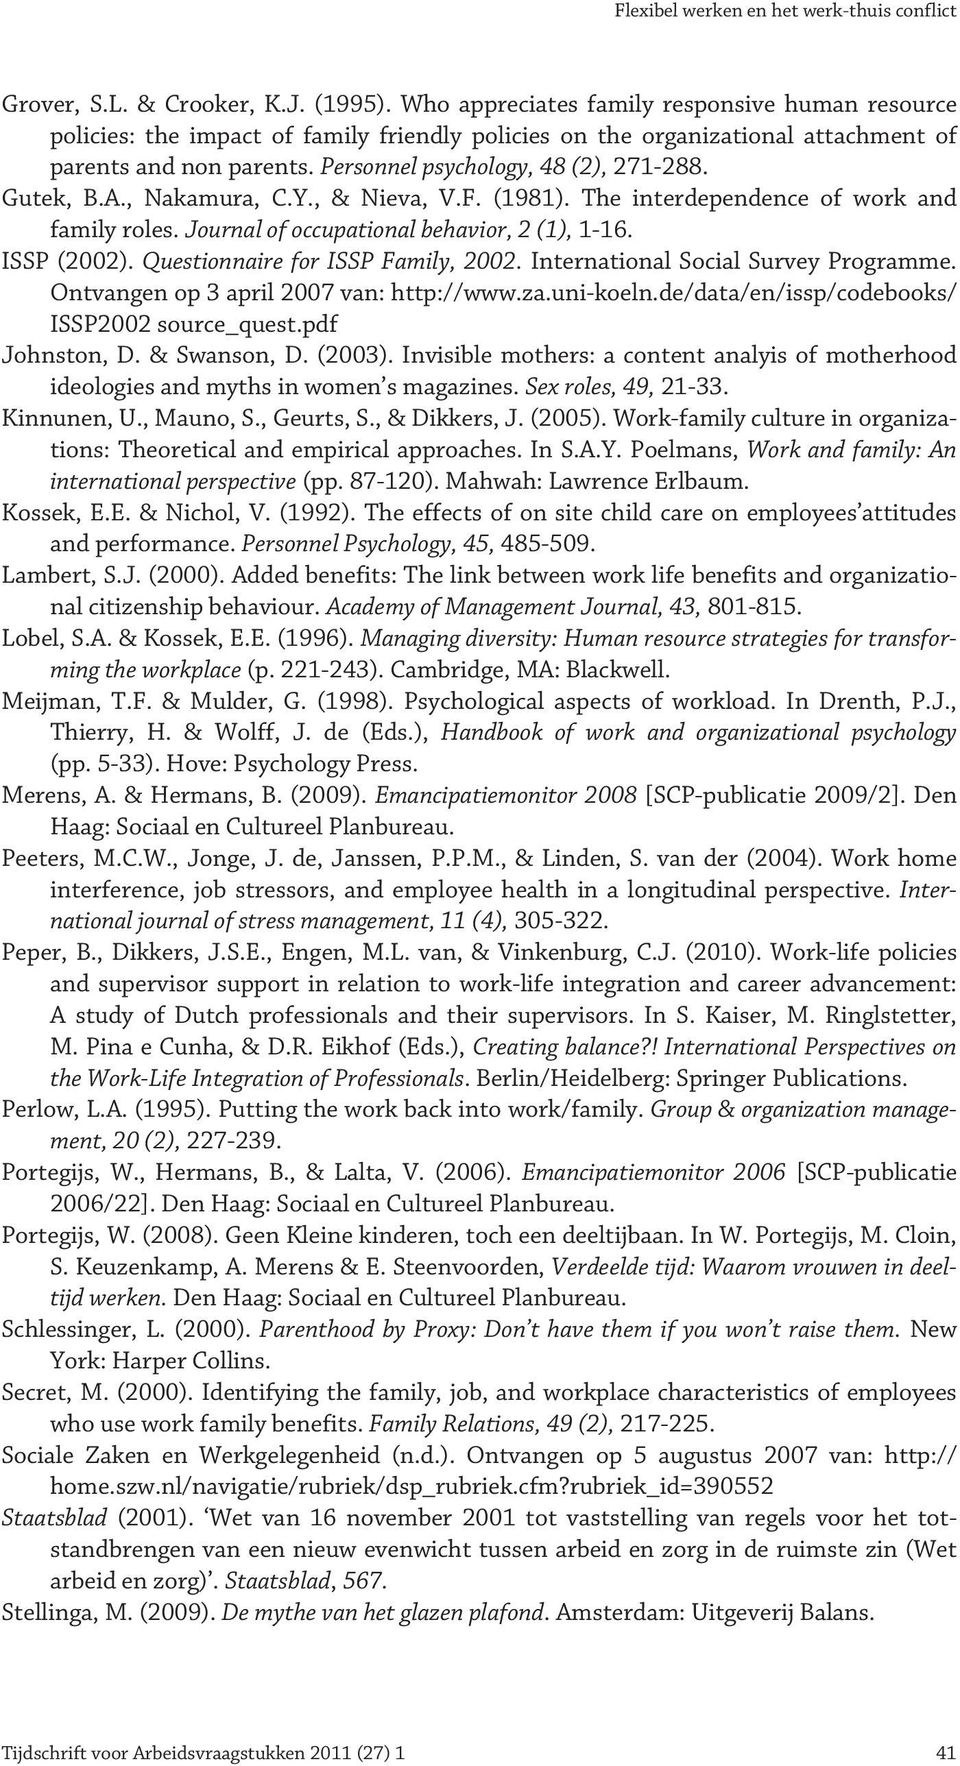 Gutek, B.A., Nakamura, C.Y., & Nieva, V.F. (1981). The interdependence of work and family roles. Journal of occupational behavior, 2 (1), 1-16. ISSP (2002). Questionnaire for ISSP Family, 2002.